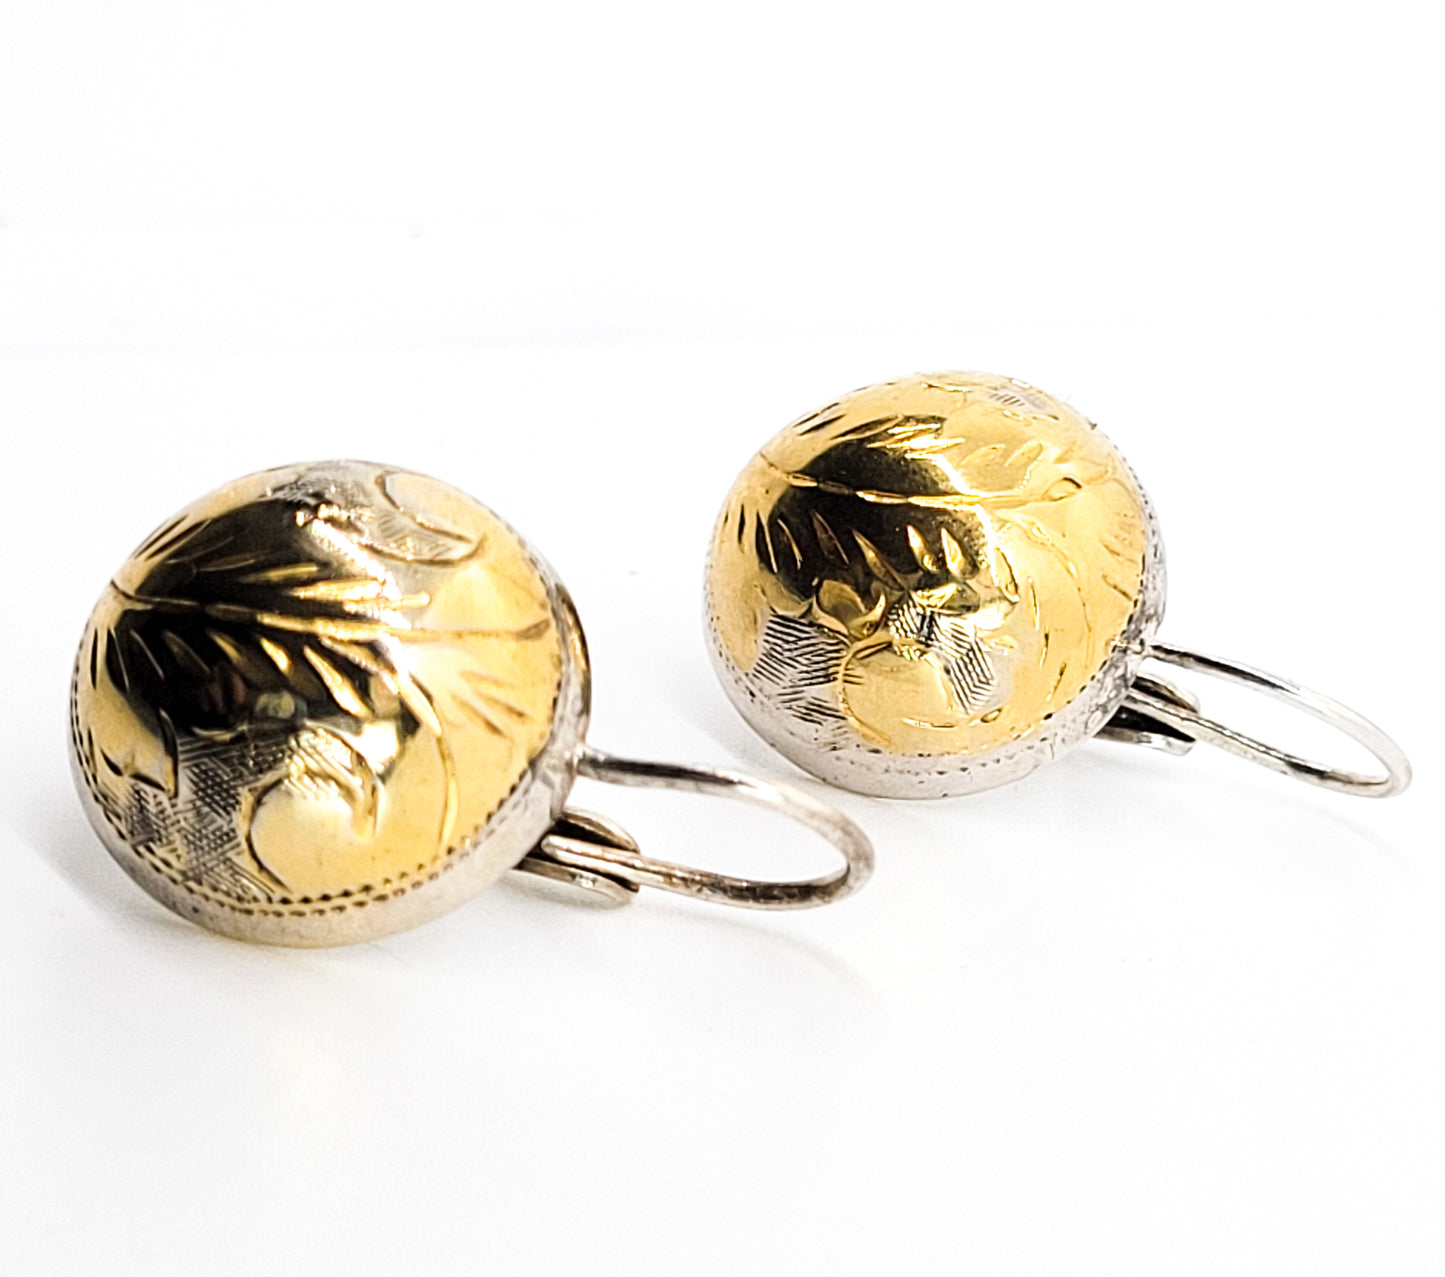 Stamped Dome Concho gold accent vintage sterling silver earrings